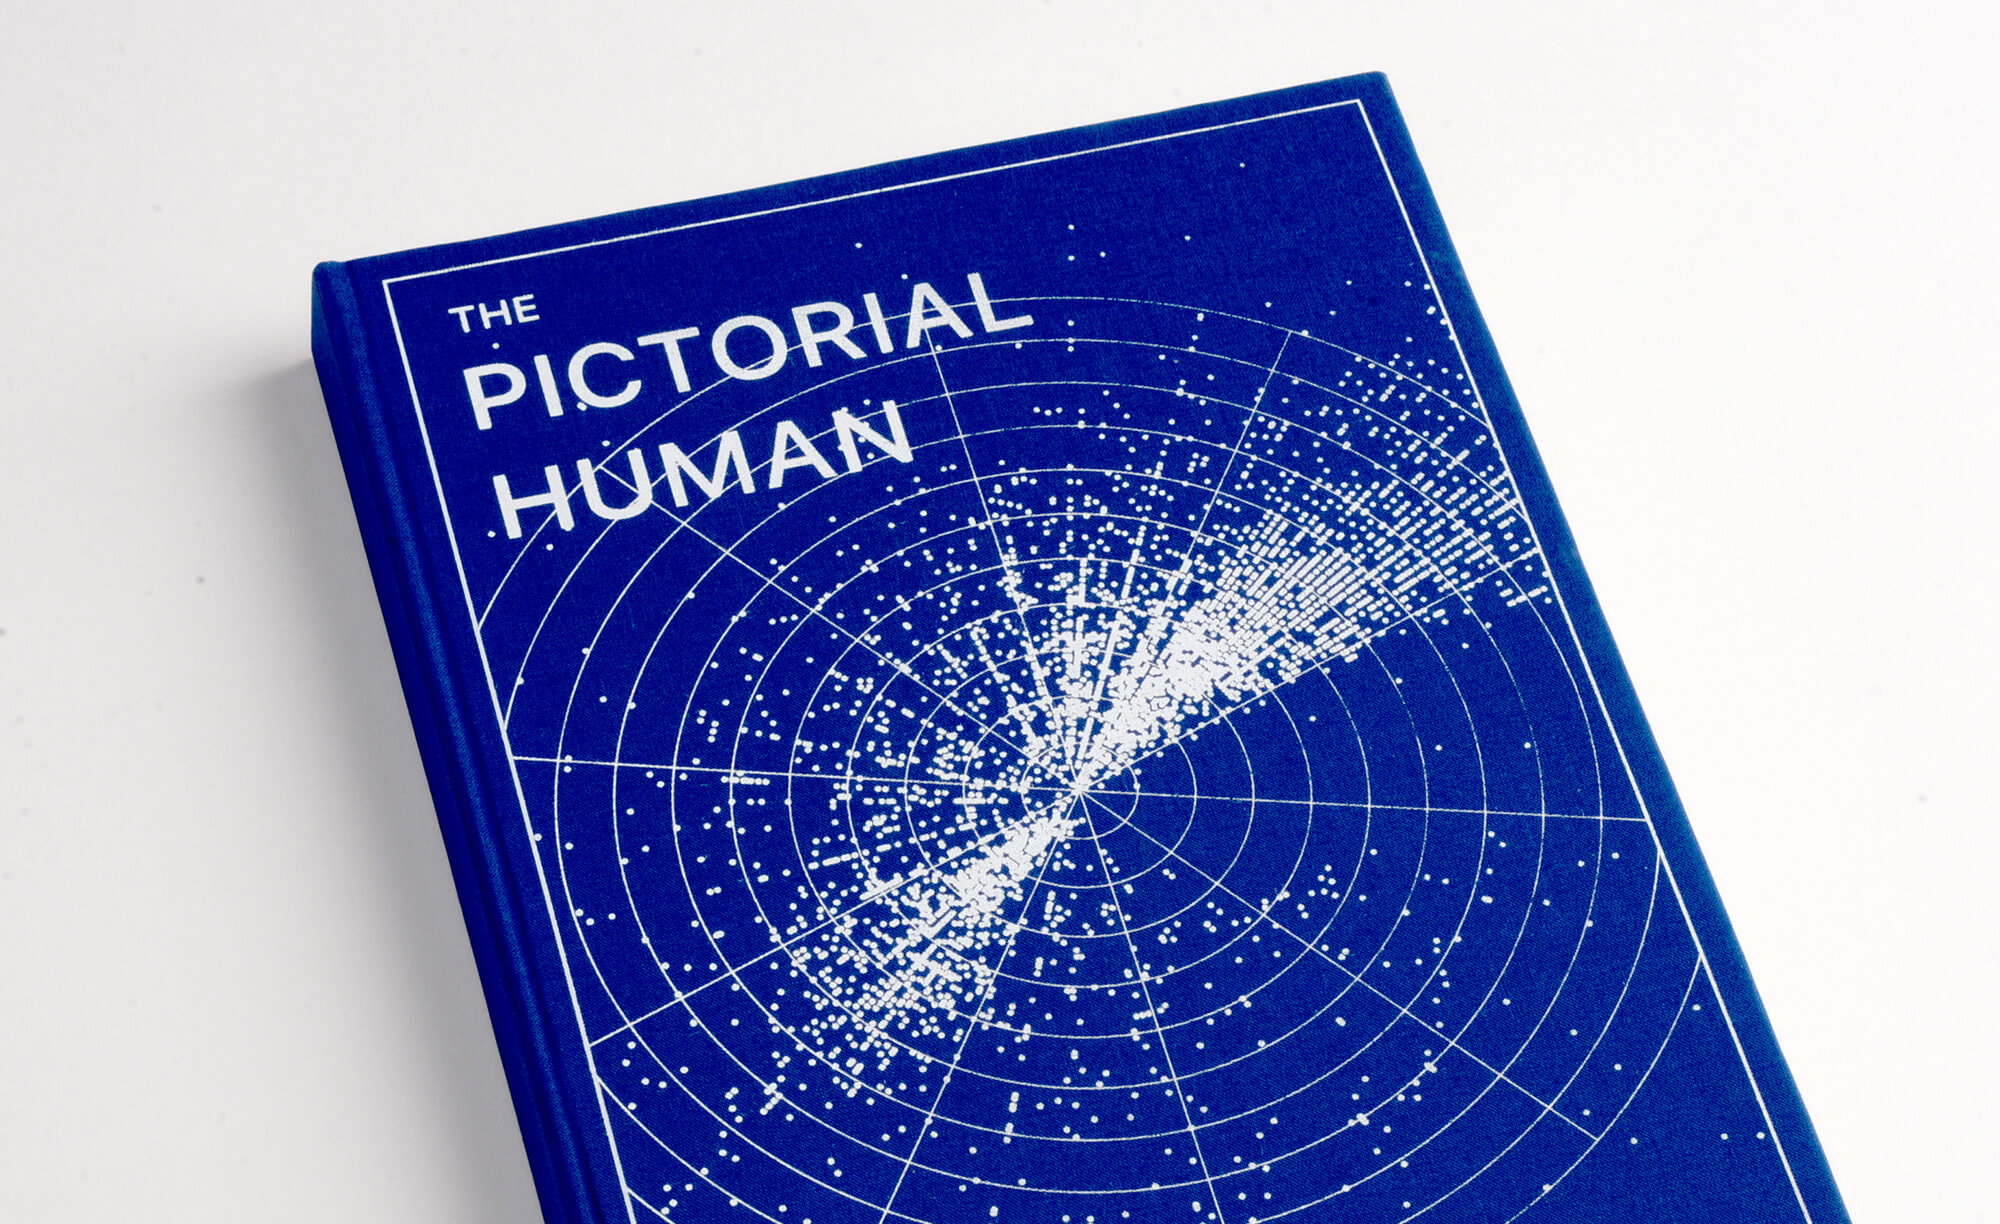 The Pictorial Human blue book cover with white visuals and text